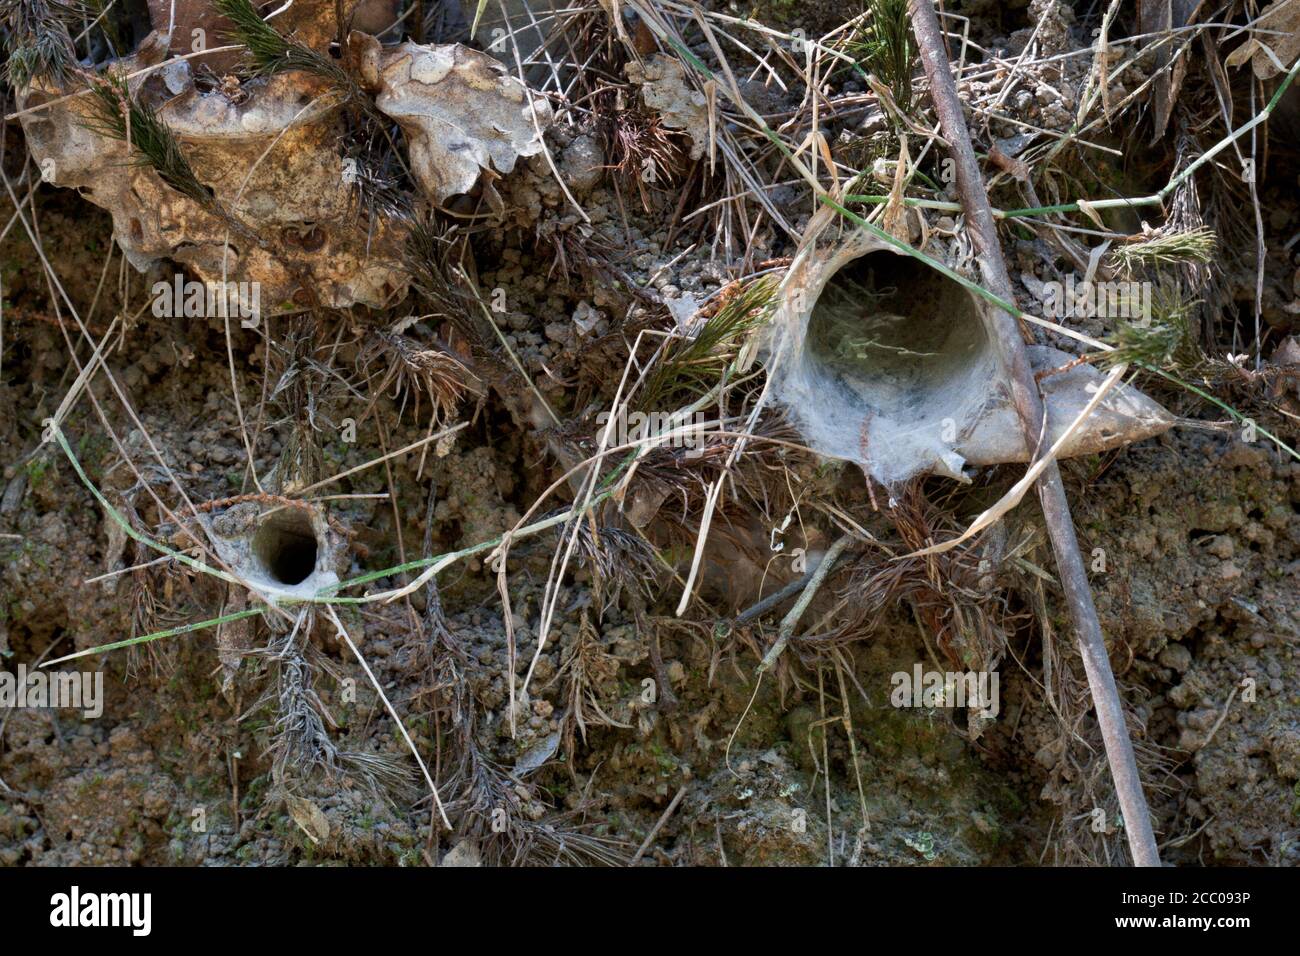 Burrow entrances of Brown Trapdoor Spiders (Arbanitis longipes) in embankment. October 2009. Couchy Creek Nature Reserve. New South Wales. Australia. Stock Photo